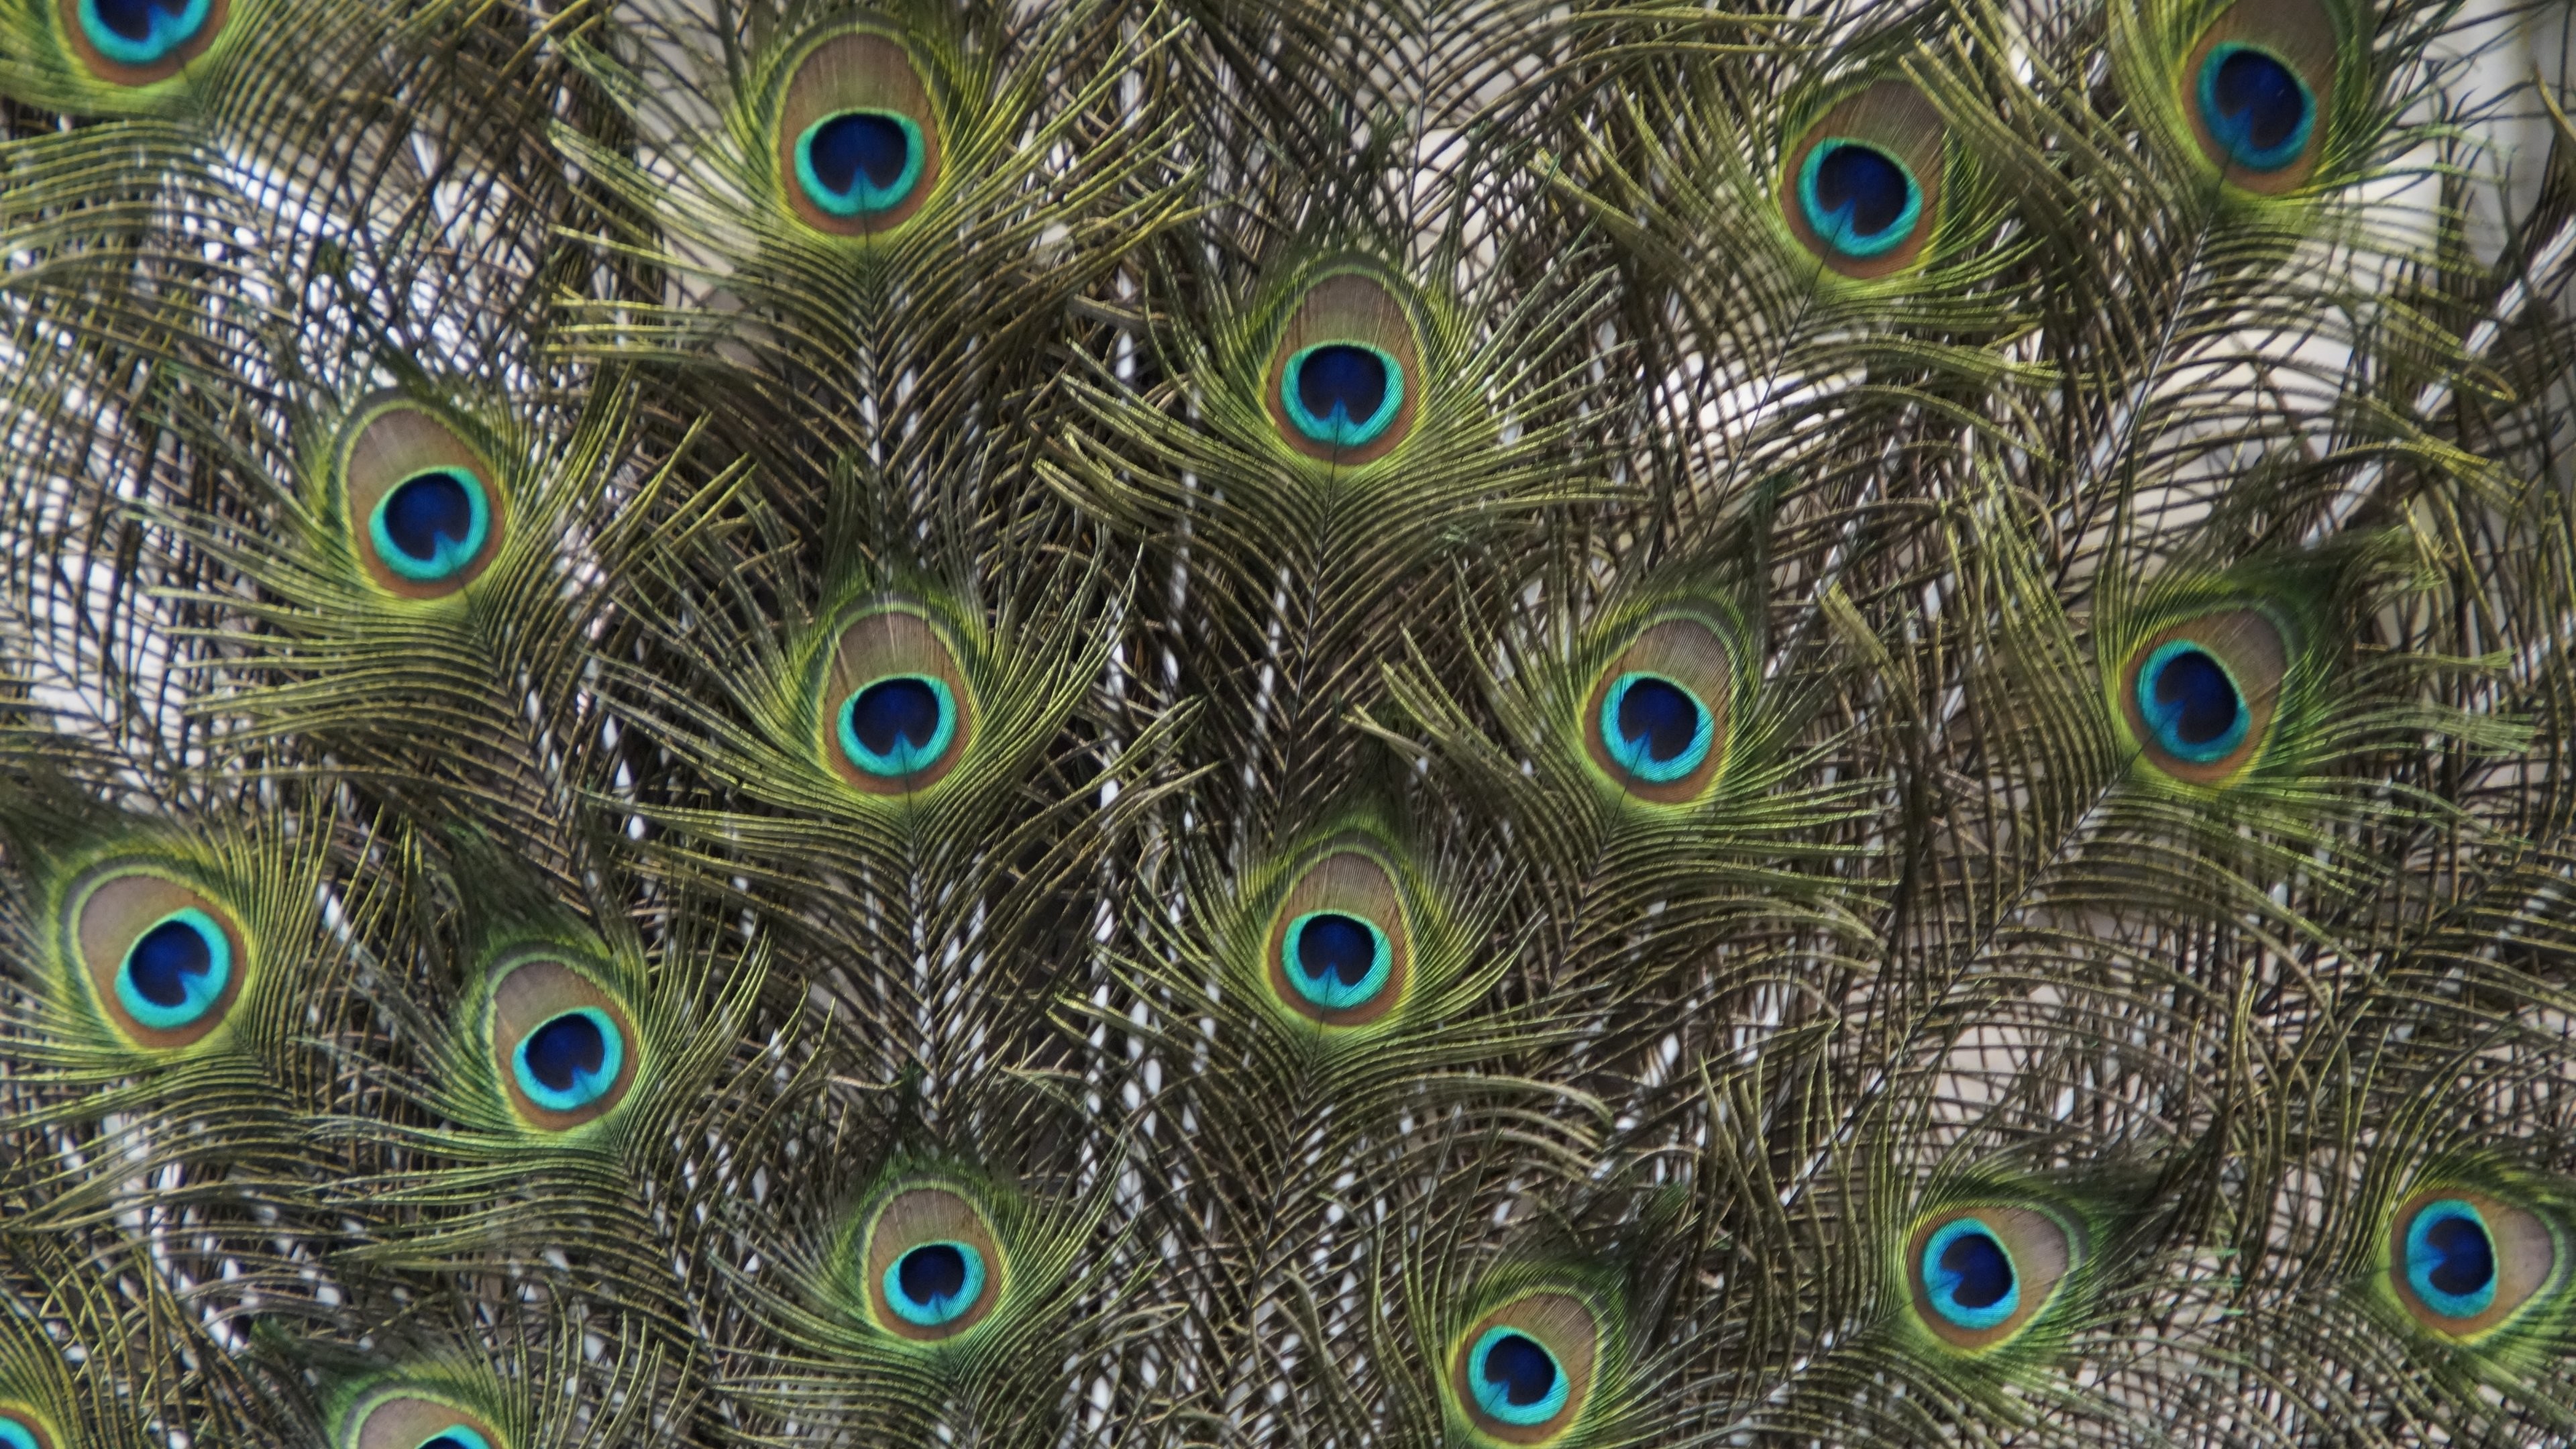 3840x2160 Peacock Feathers